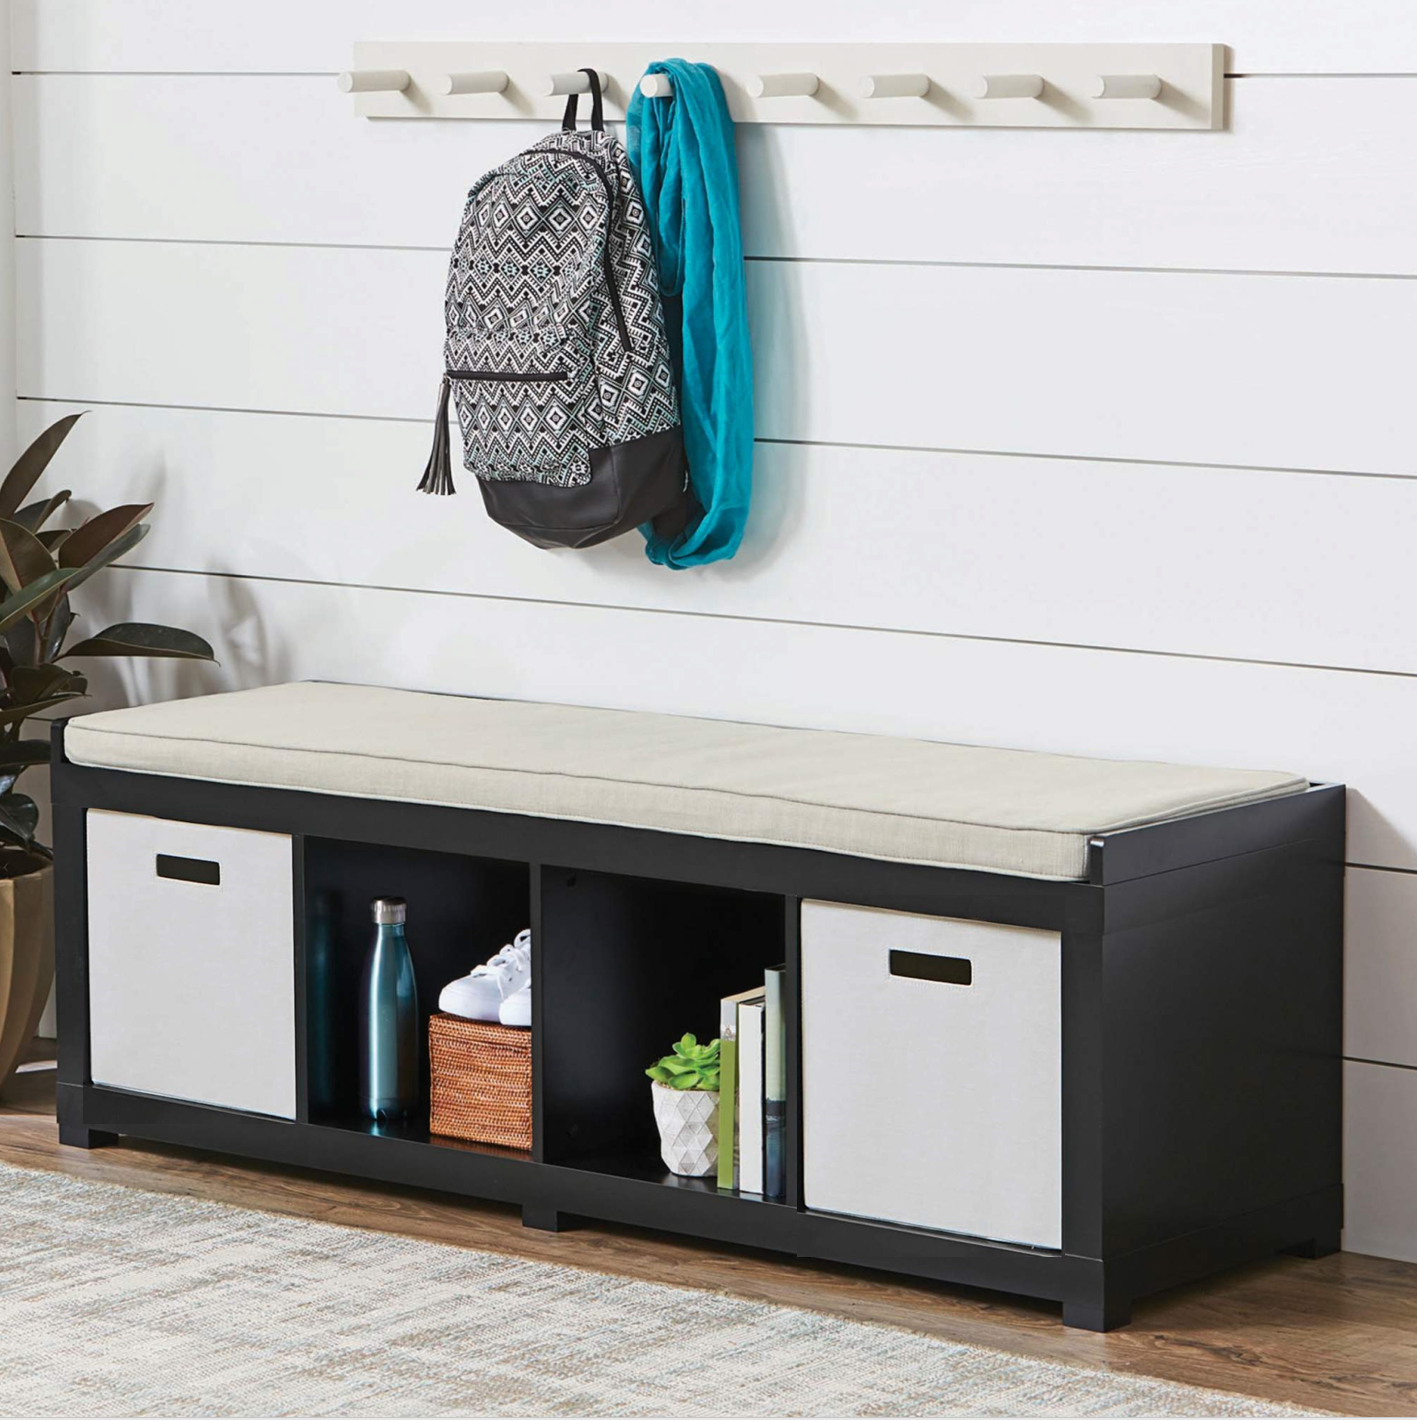 Better Homes & Gardens 4-Cube Shoe Storage Bench, Black - image 1 of 7